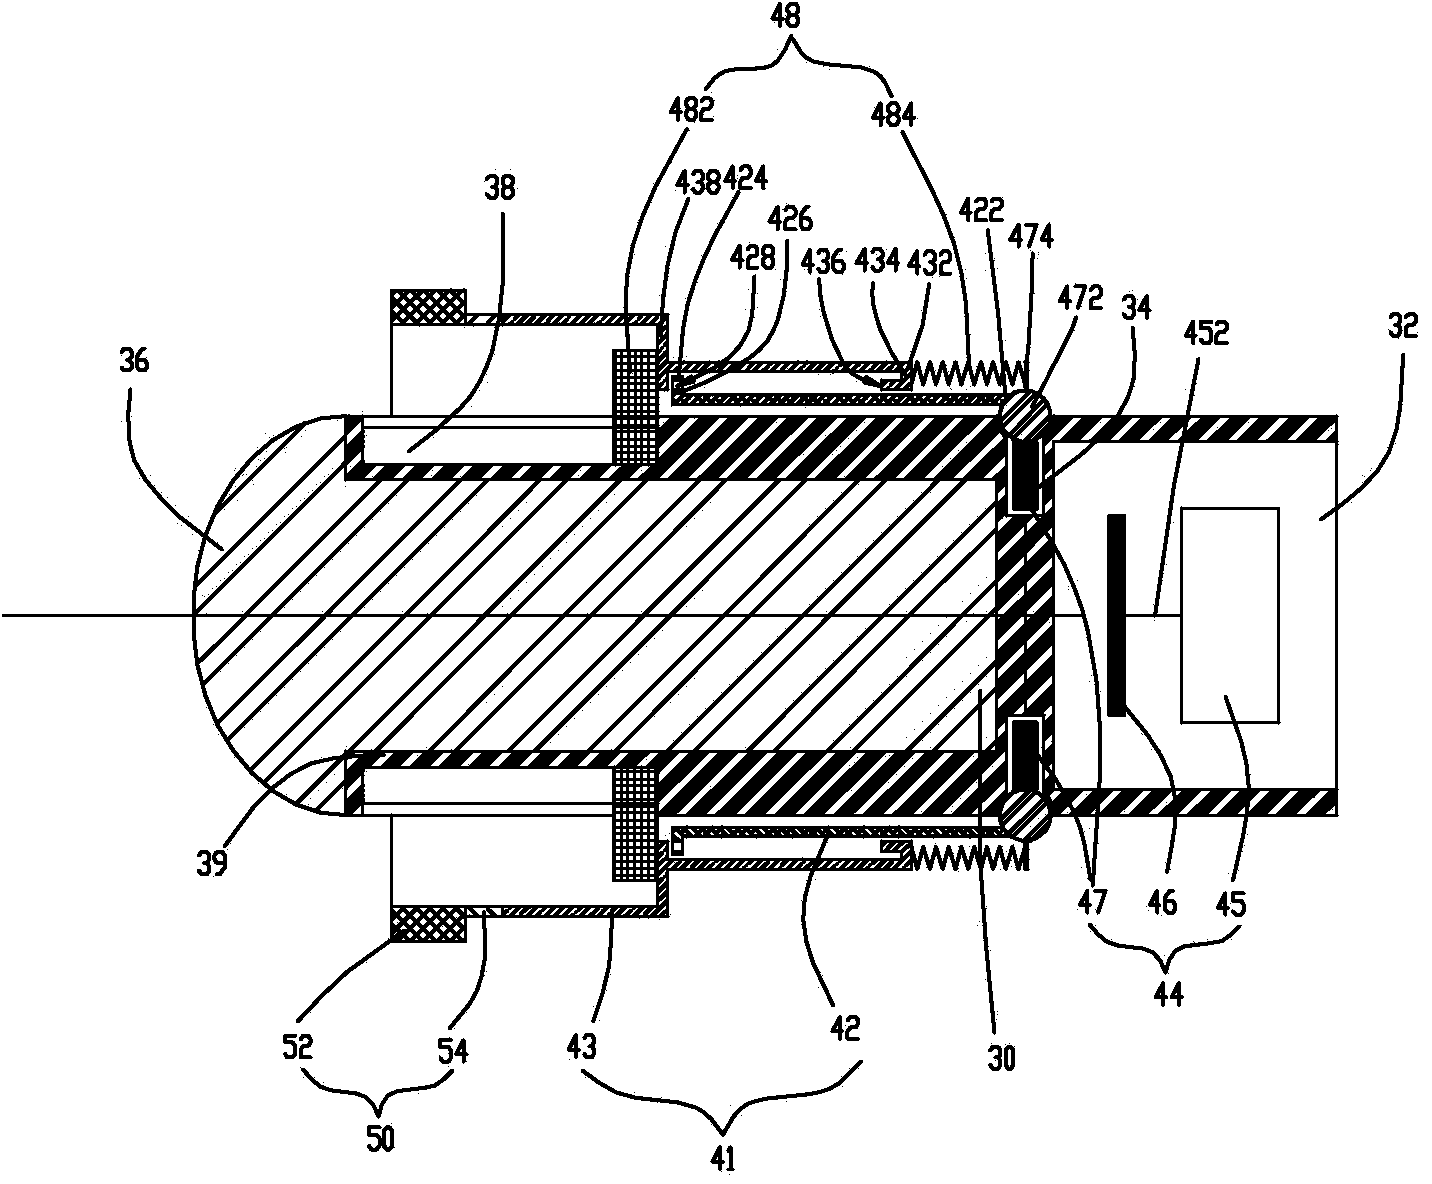 Welding device with preweld cleaning function and welding method